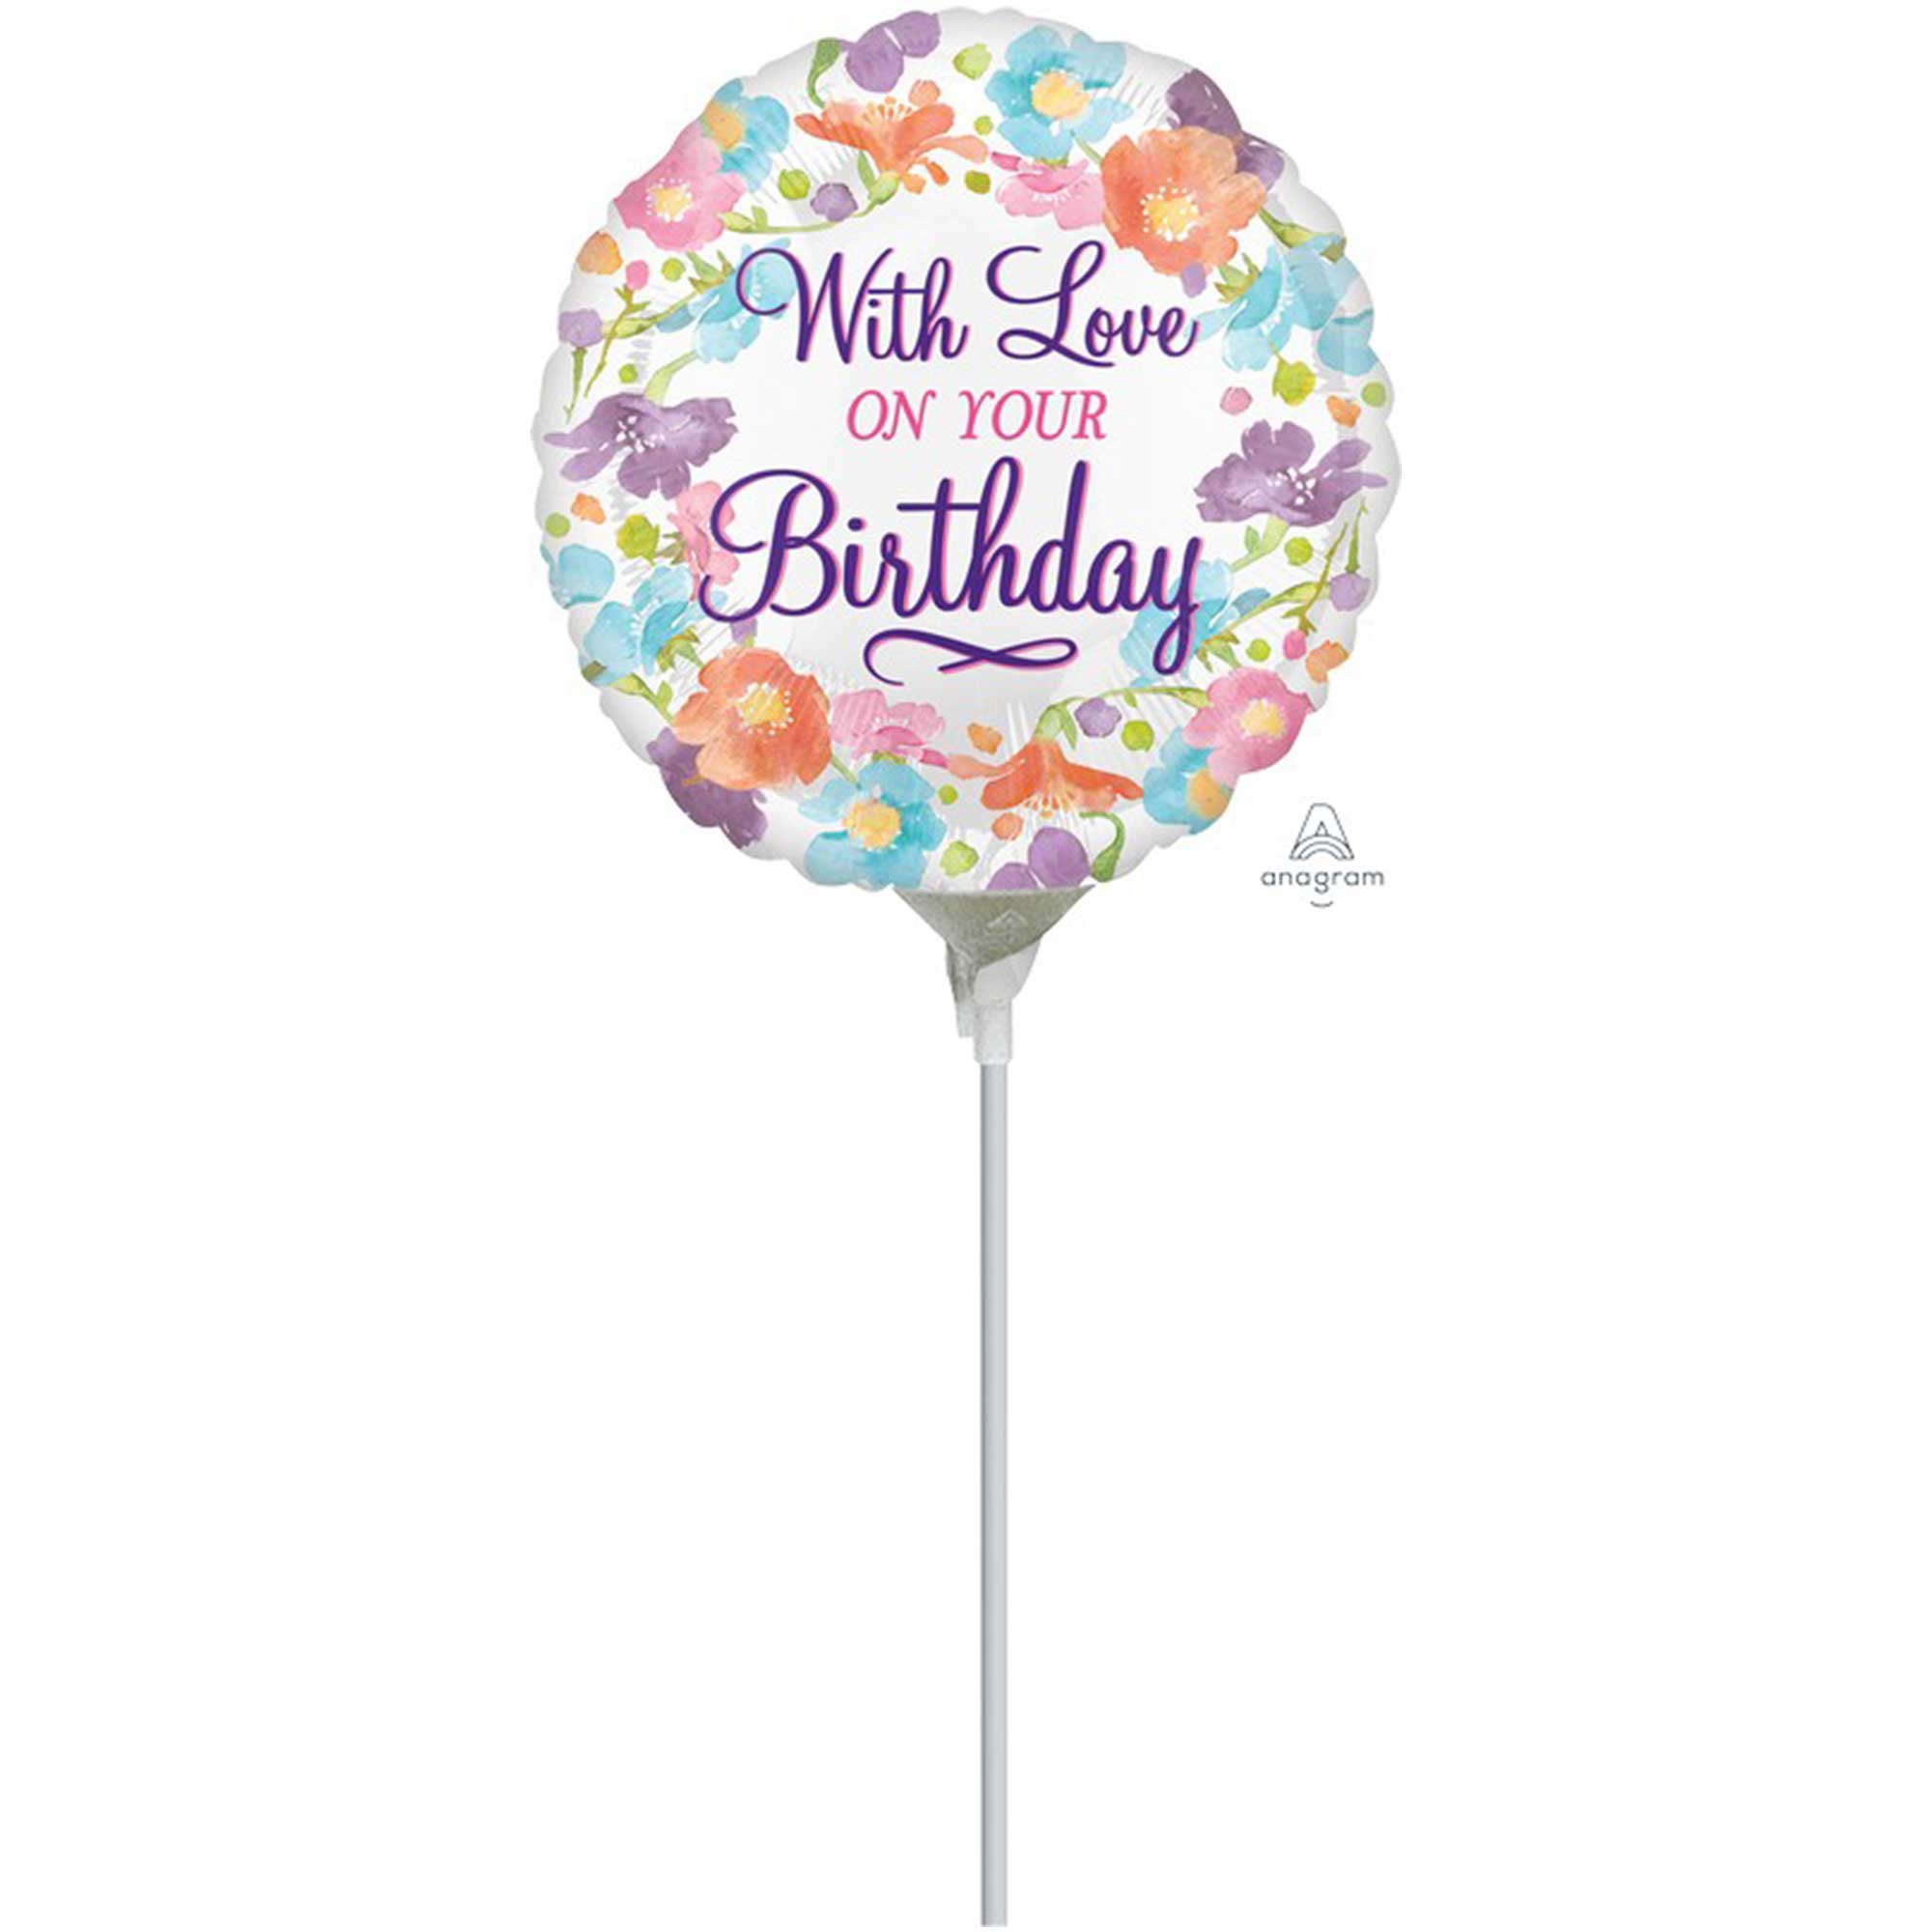 Add a splash of fun to any occasion with our vibrant 10cm foil balloons! Perfect for birthdays, weddings, or any celebration